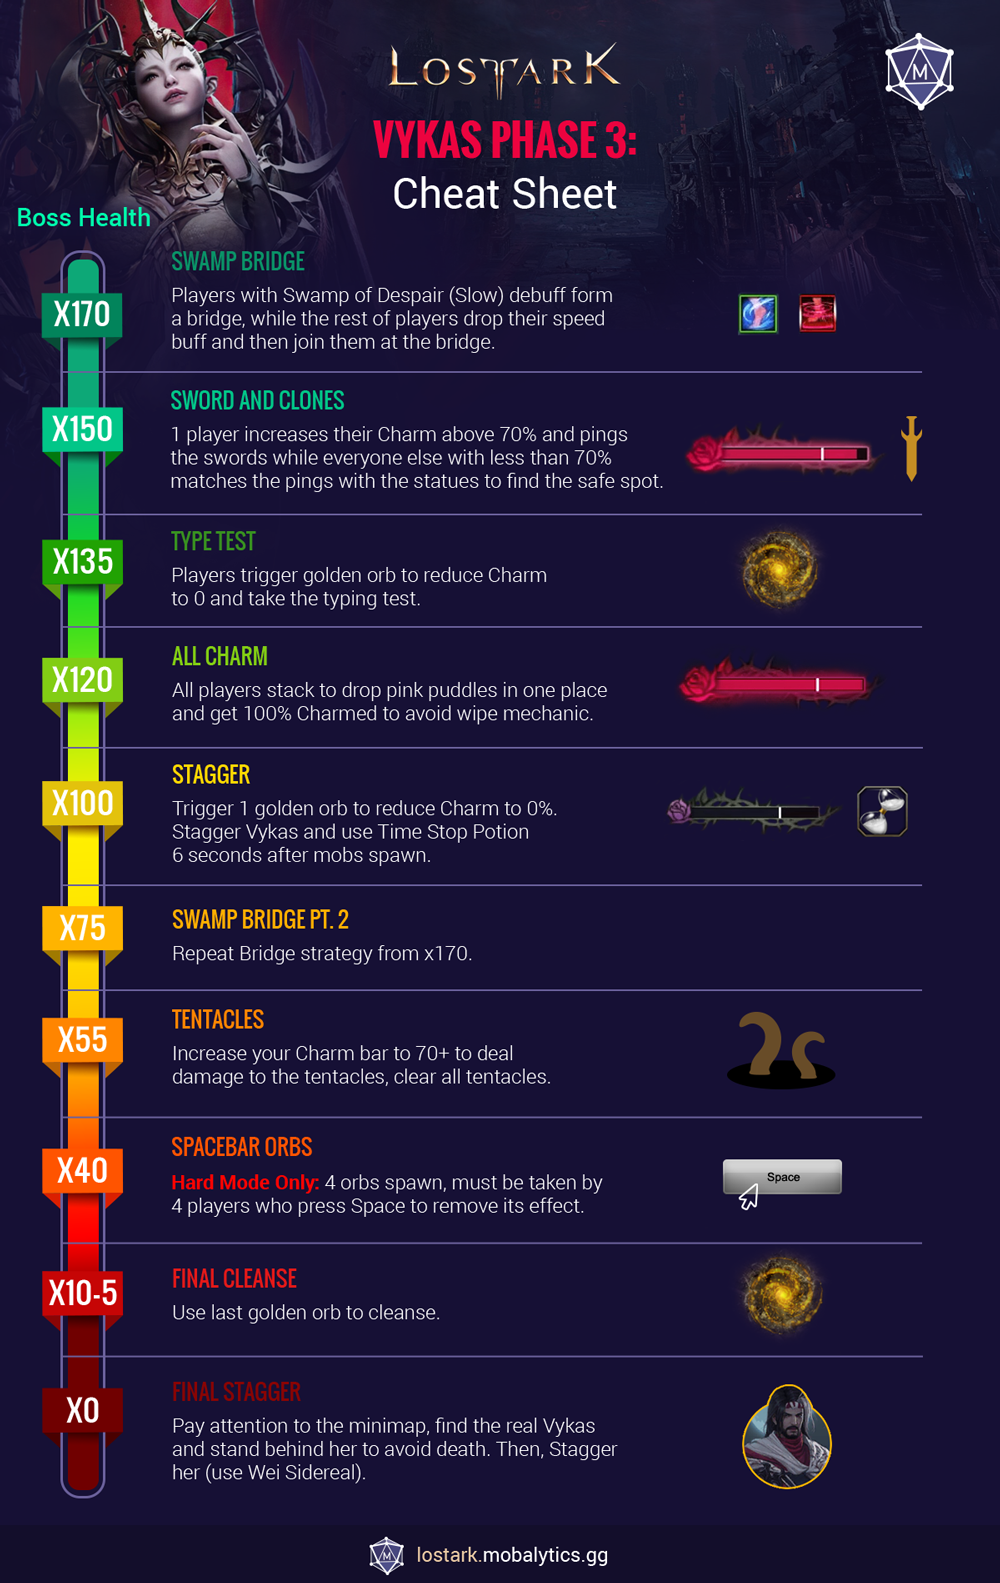 Phase 3 Vykas Cheat Sheet Infographic